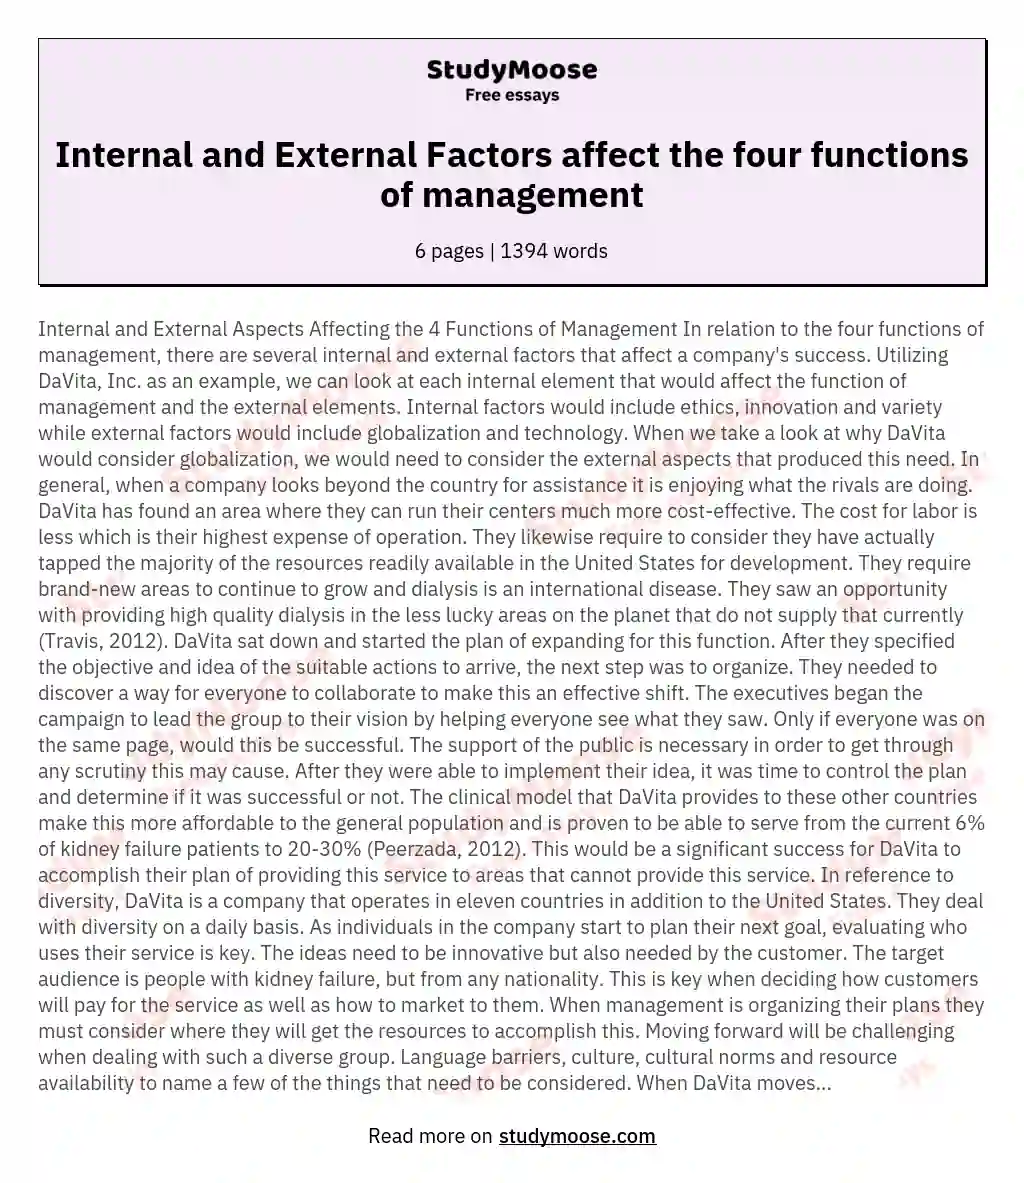 Internal and External Factors affect the four functions of management